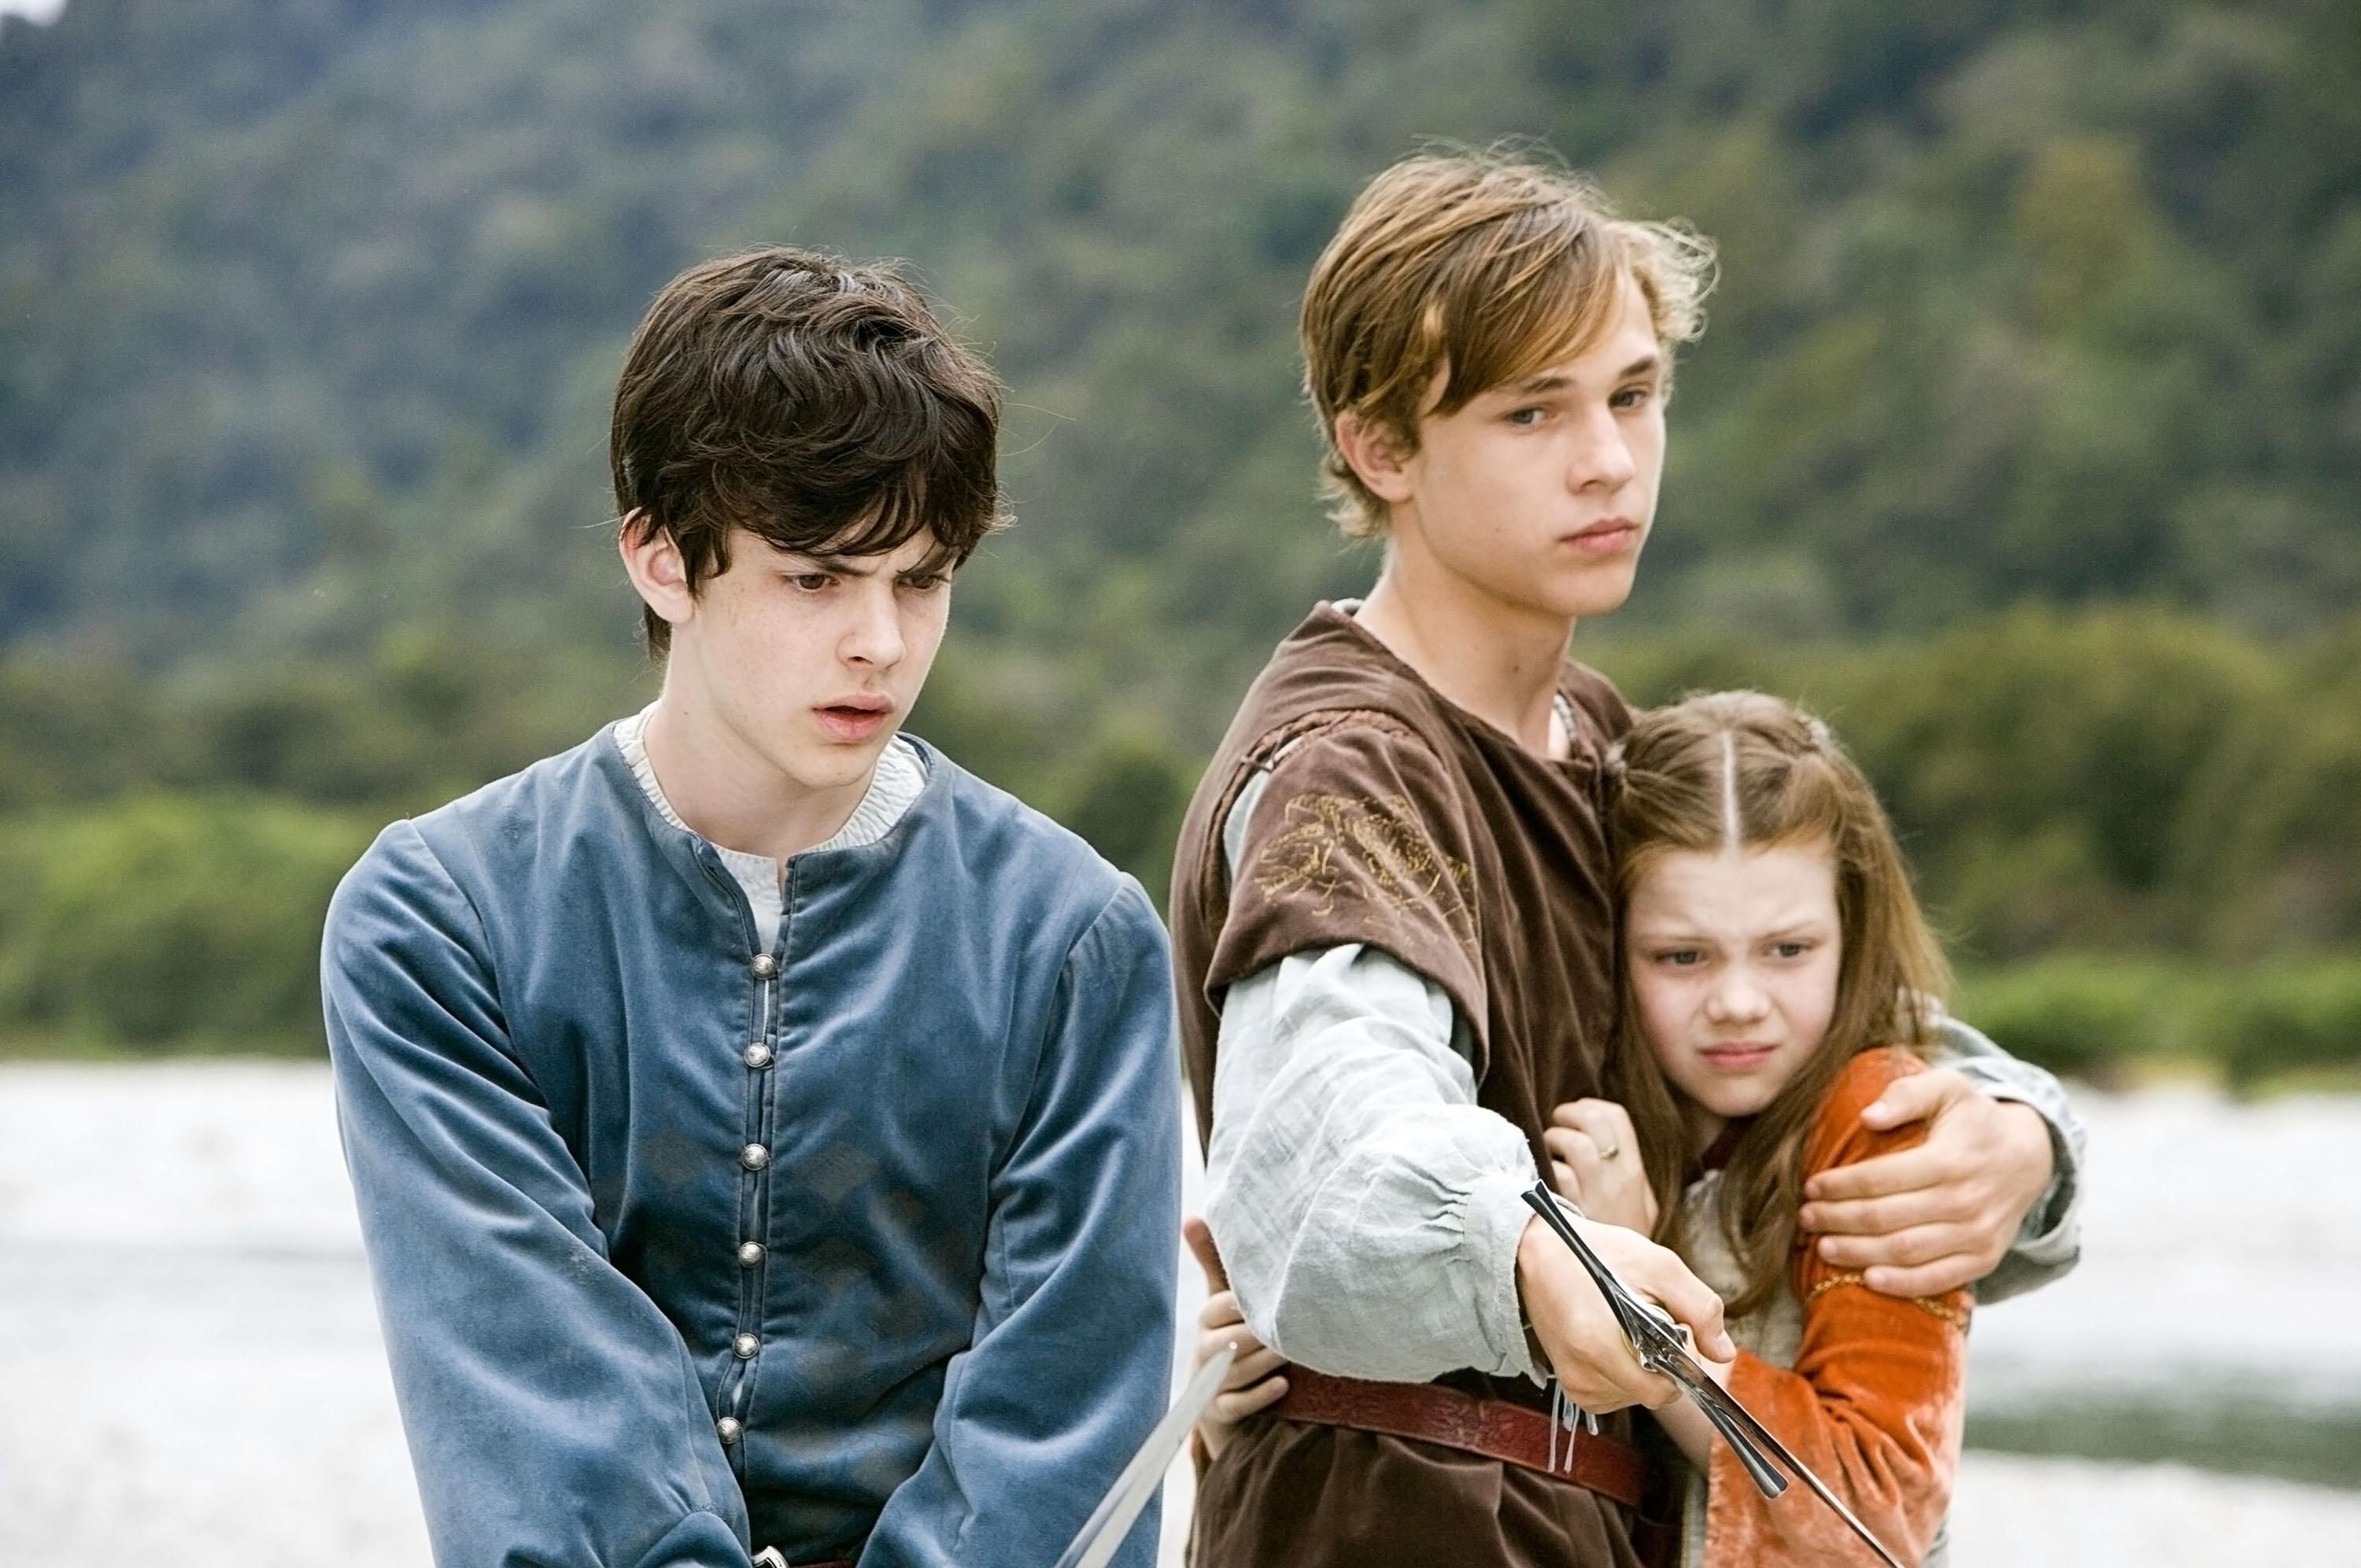 Edmund, Peter and Lucy. Prince Caspian. Chronicles of narnia, Narnia movies, Narnia